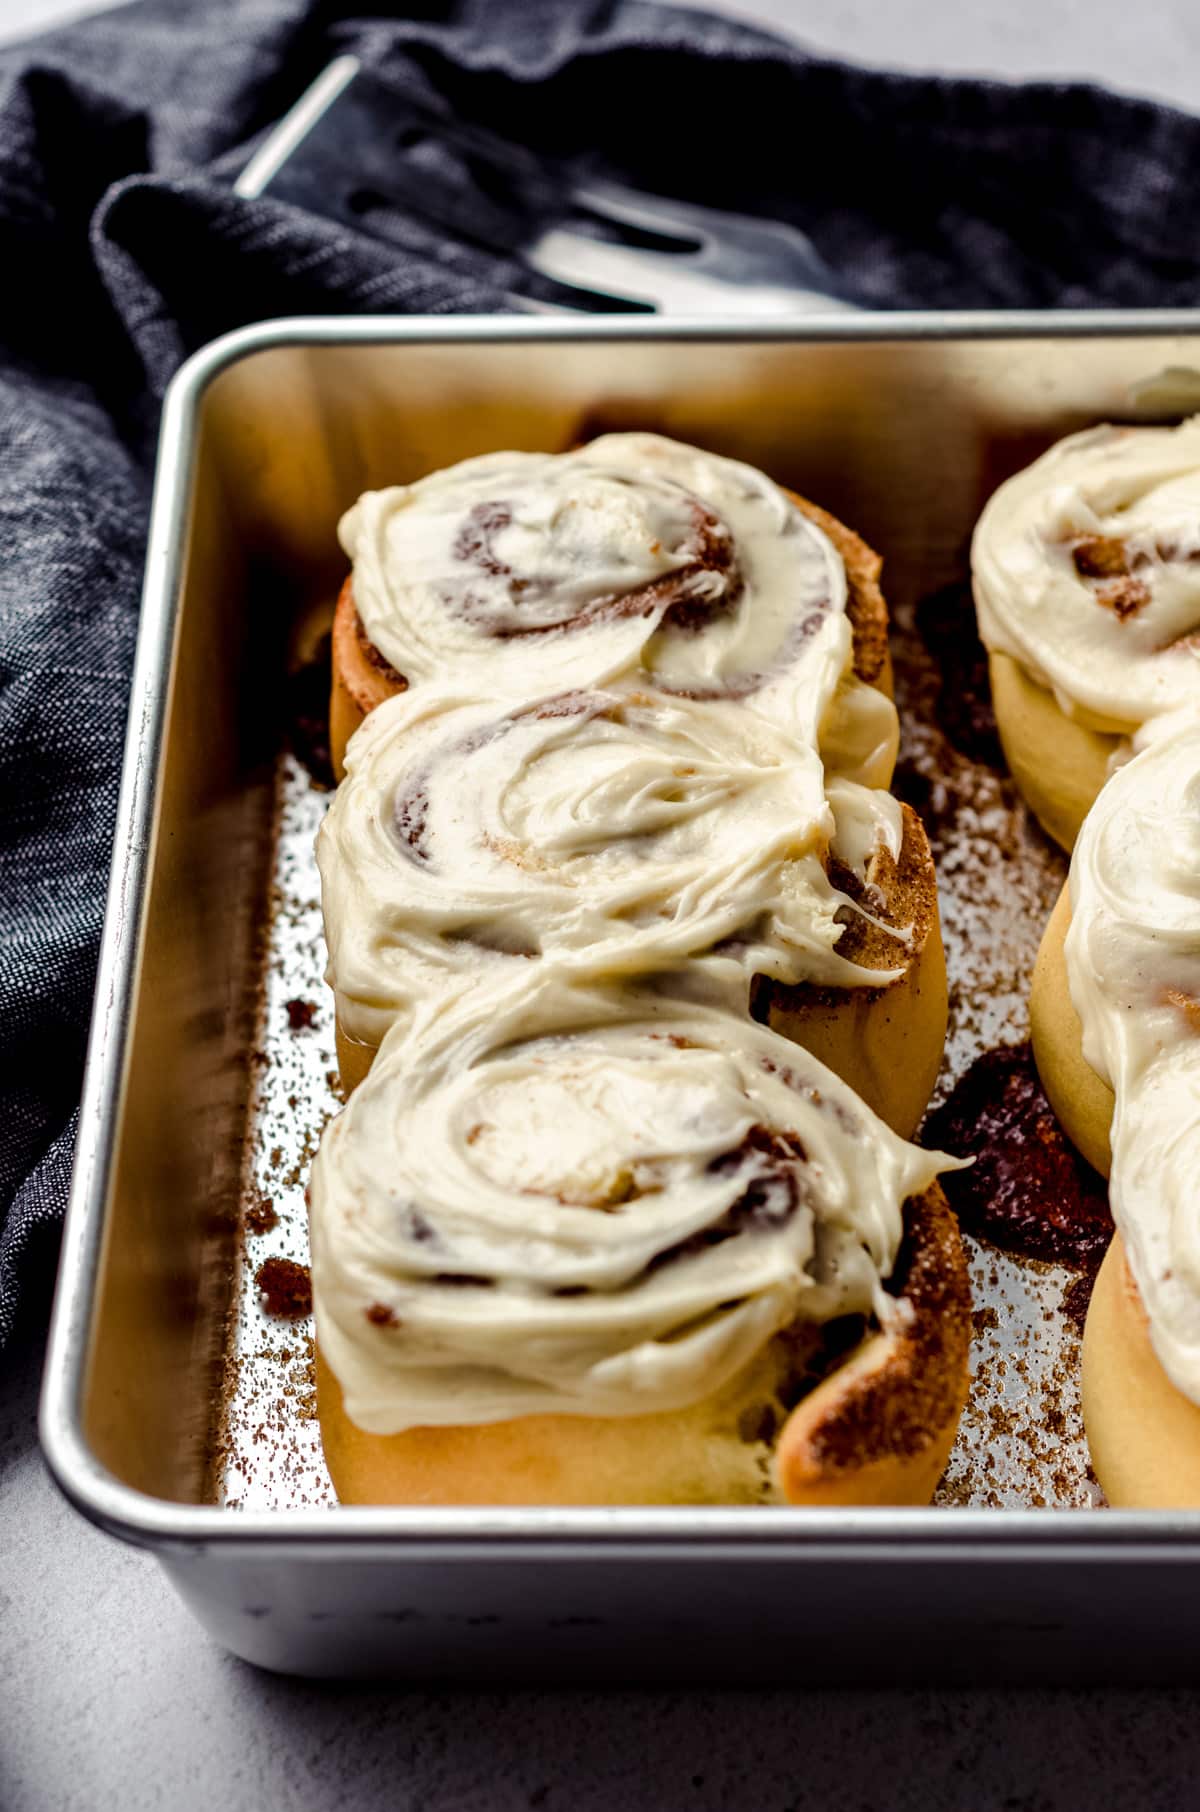 Small batch cinnamon rolls in a baking dish with cream cheese frosting spread on top.